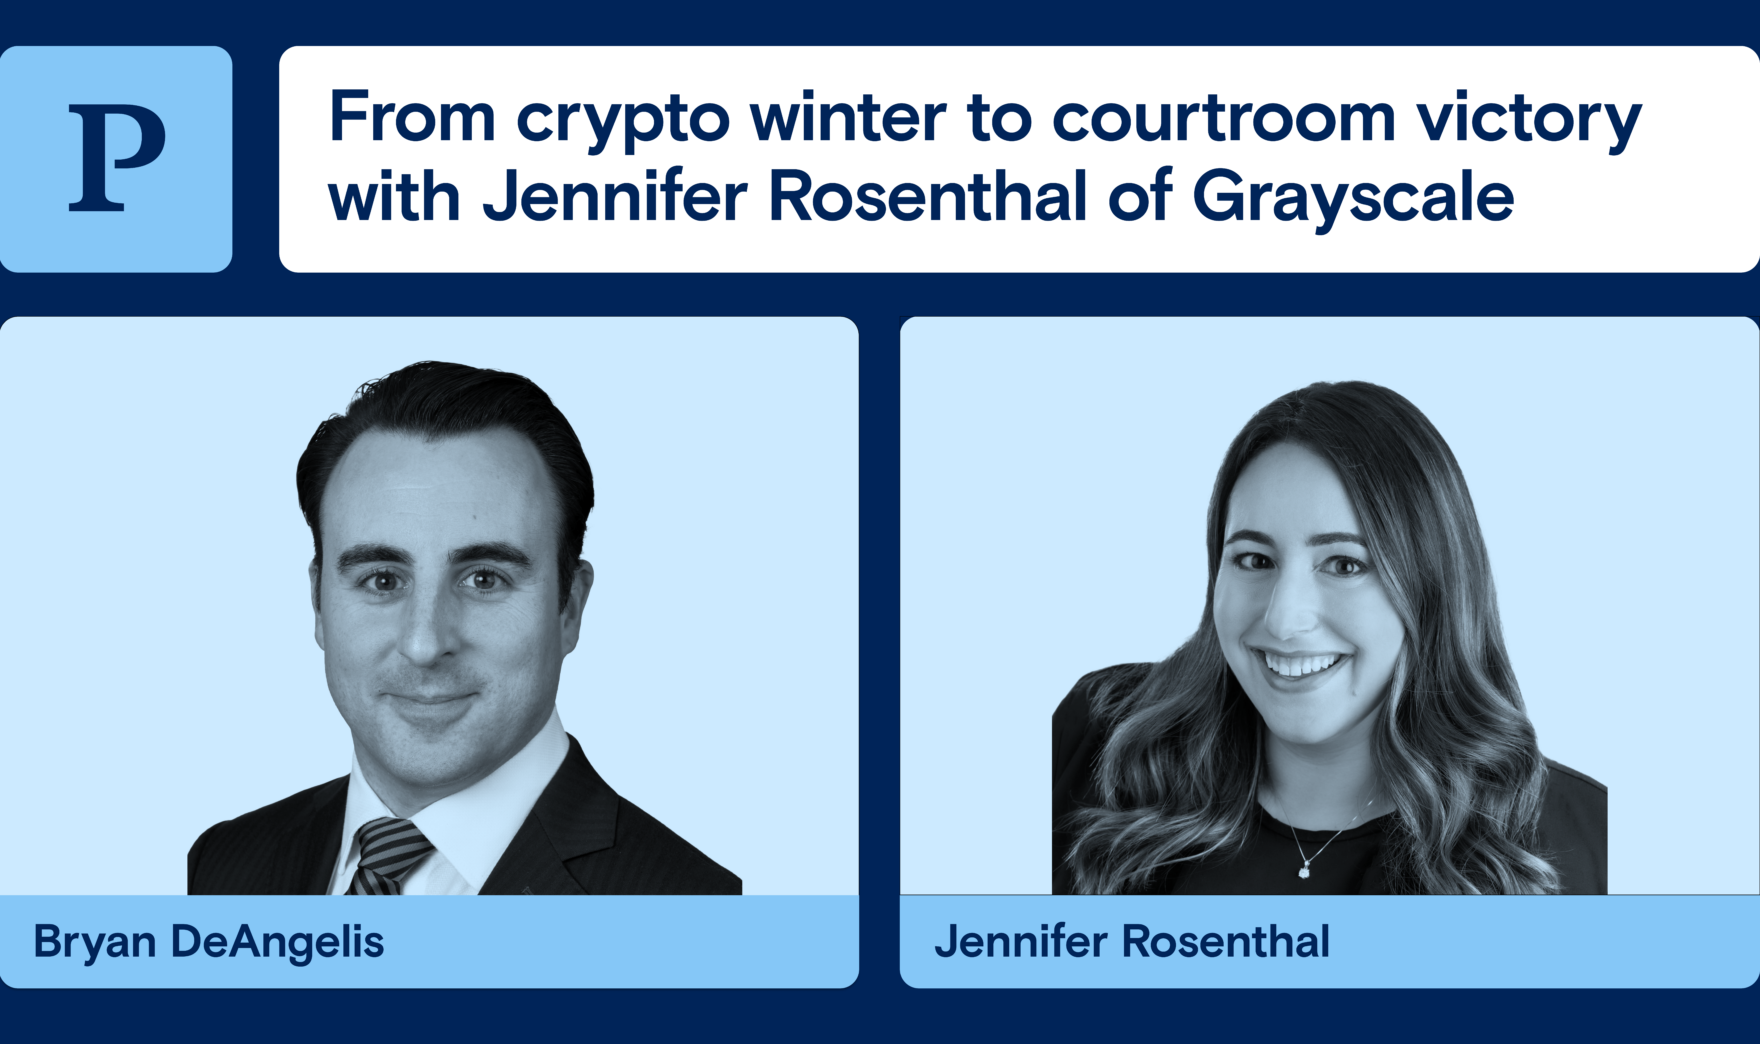 From crypto winter to courtroom victory with Jennifer Rosenthal of Grayscale